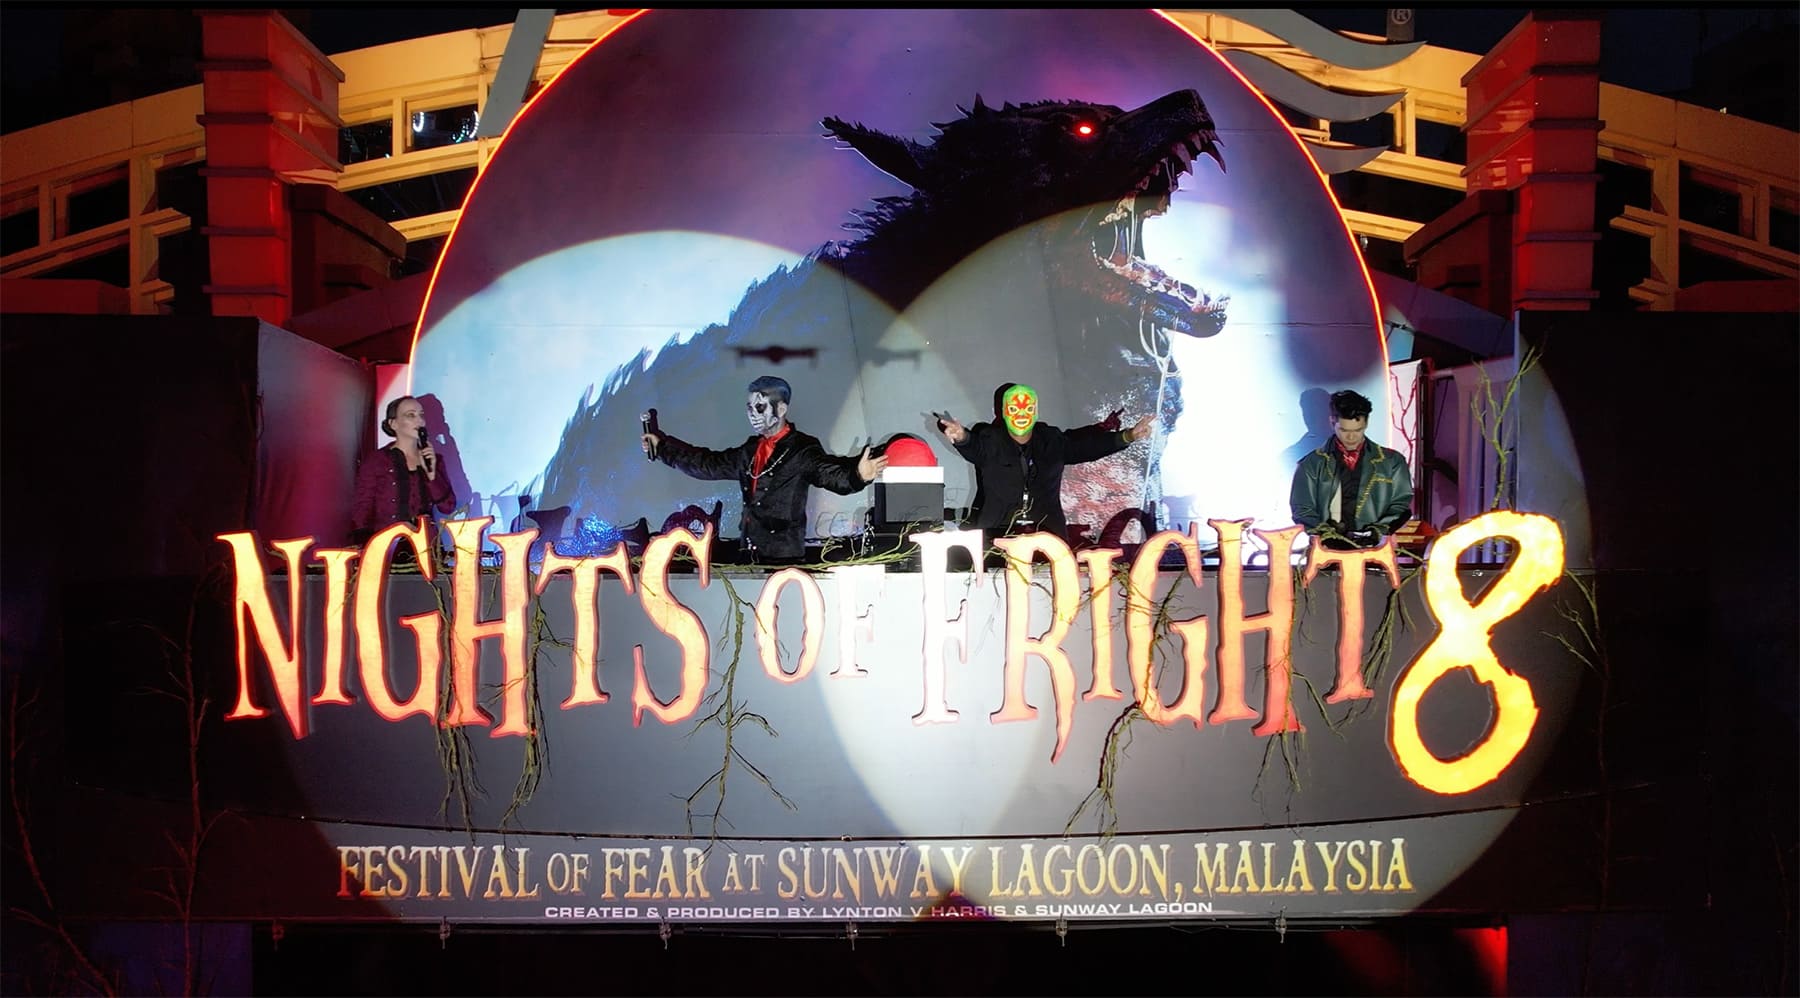 night of frights 8 - festival of fear at Sunway Lagoon